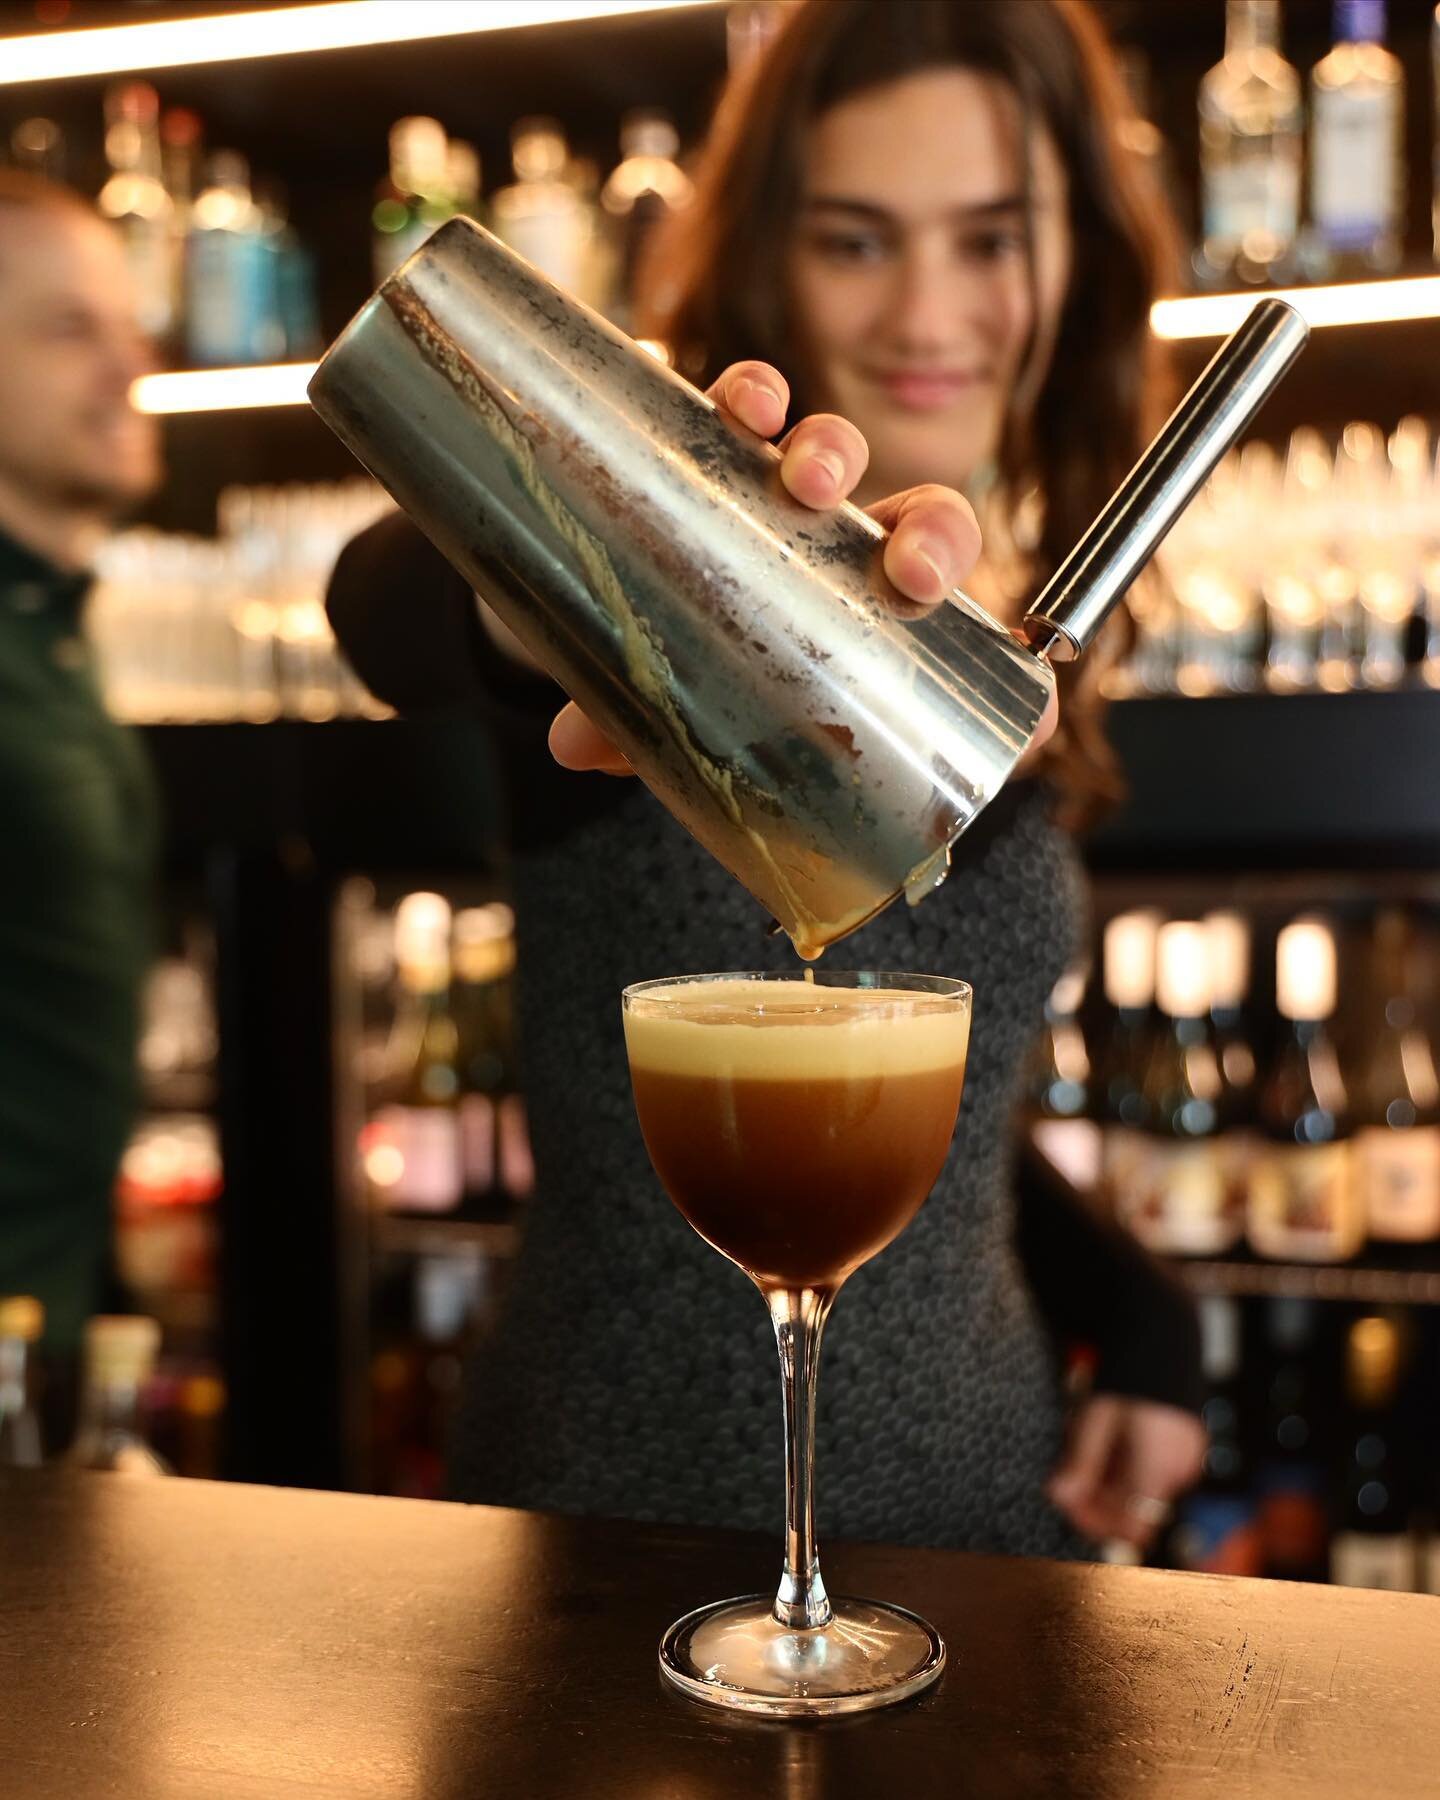 Pouring our last drops before the long weekend&hellip;🤎🤎Closed for choccy holidays, back open Tuesday! 🐰🤎🤎
#lanesedgewinebar #melbournewinebar #bourkestreetmelbourne #melbournecbdbars